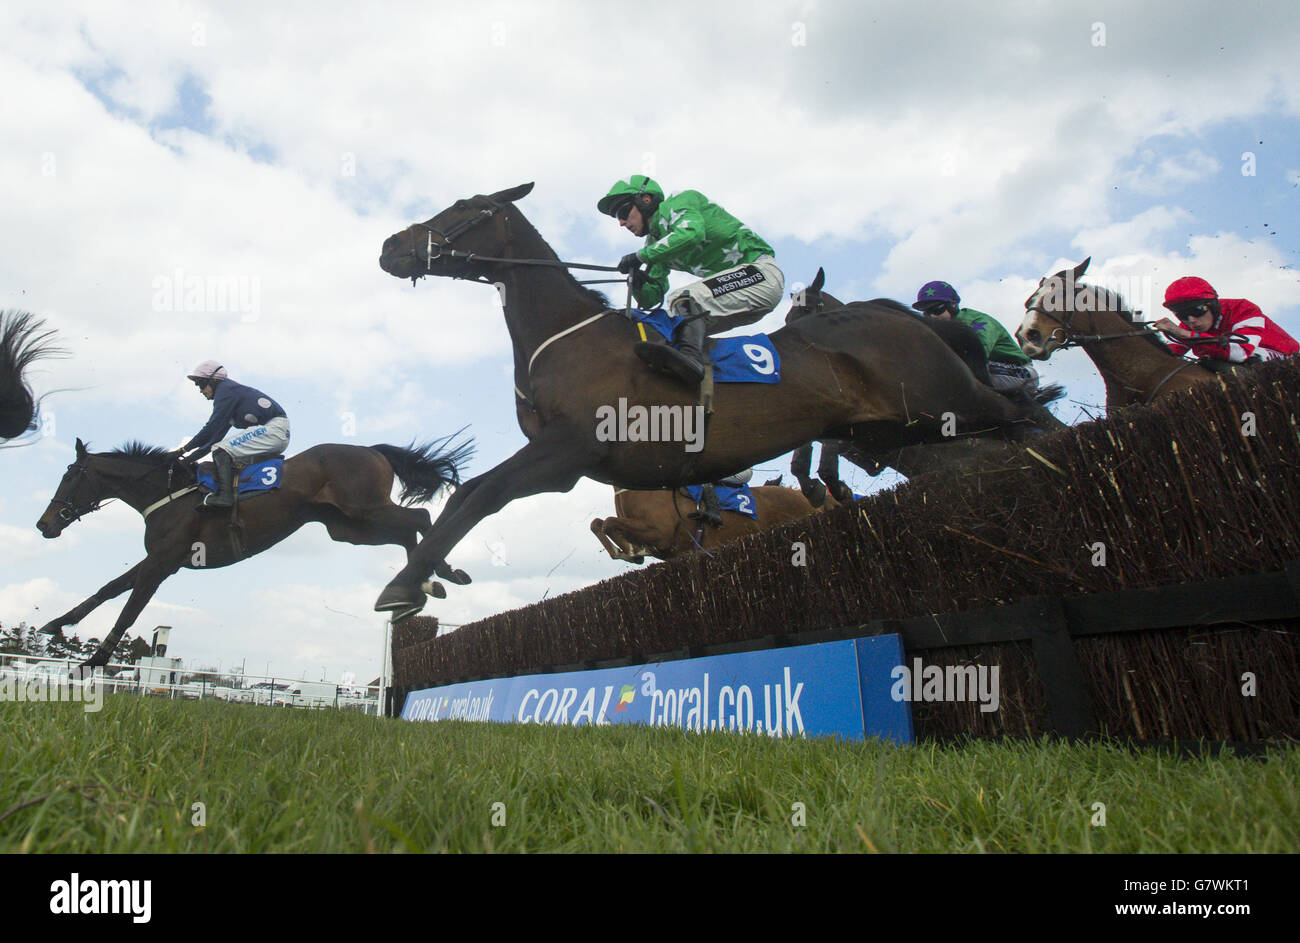 Horse Racing - 2015 Coral Scottish Grand National Festival - Day One - Ayr Racecourse. Runners and riders in The Hillhouse Quarry Handicap Steel Chase during the 2015 Coral Scottish Grand National Festival at Ayr Racecourse. Stock Photo